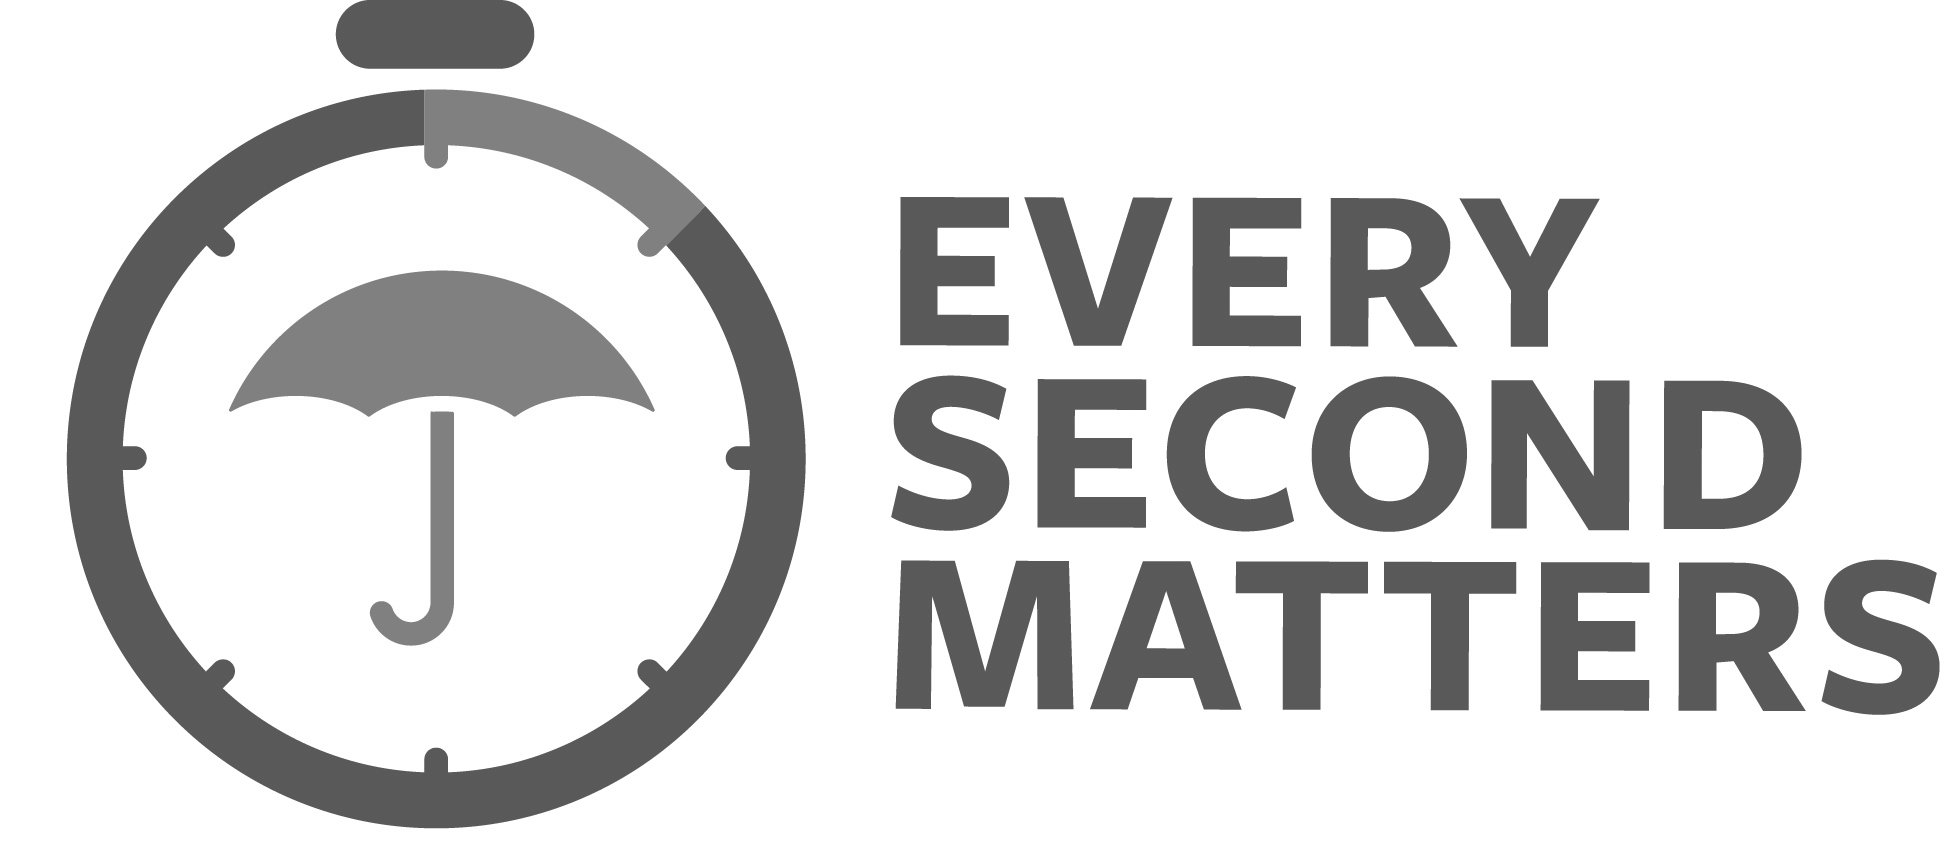 Trademark Logo EVERY SECOND MATTERS